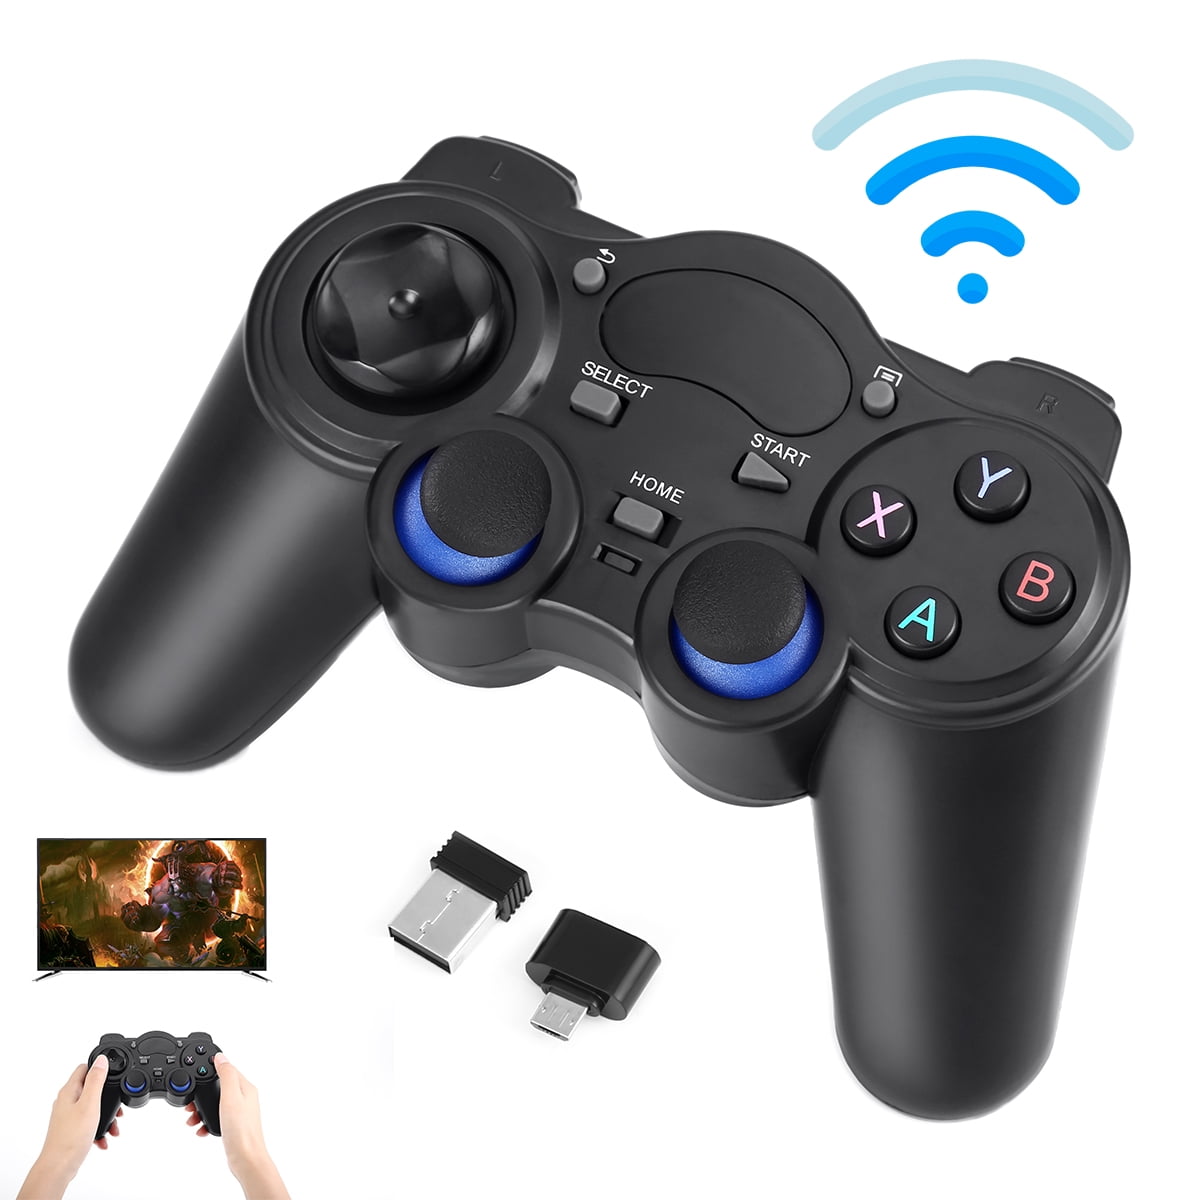 Wireless USB Game Controller Gamepad Joystick for Android TV Box Laptop